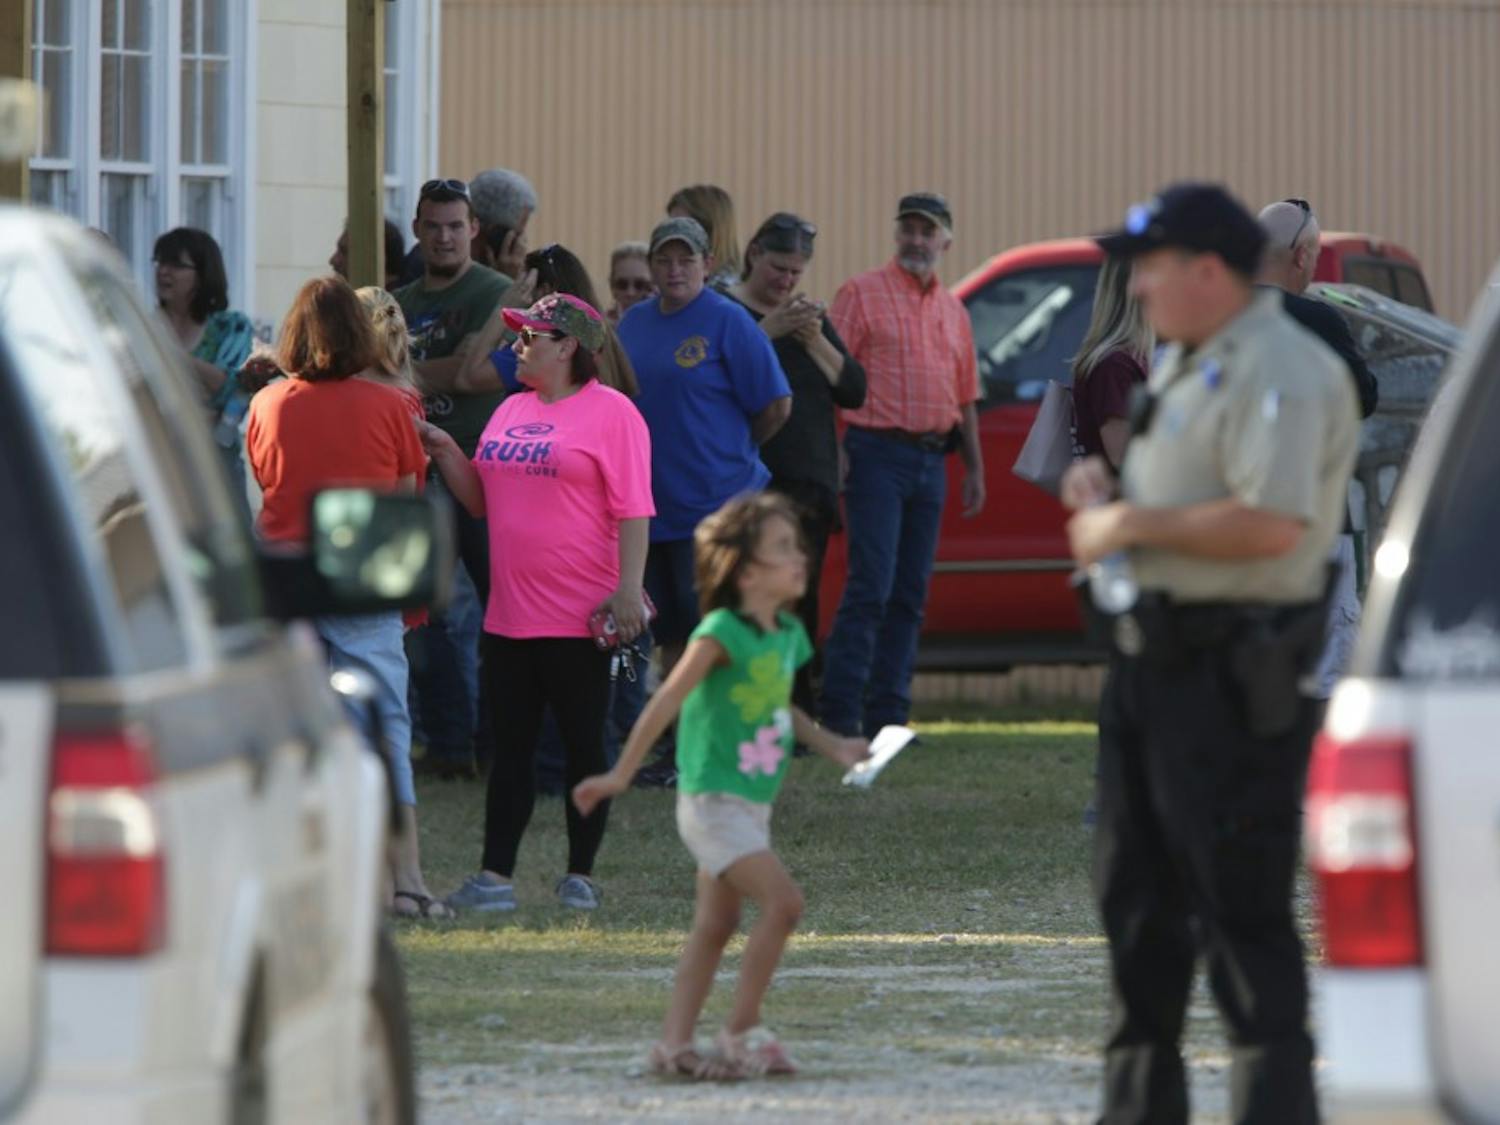 More than 20 people killed in Texas shootings, officials are told